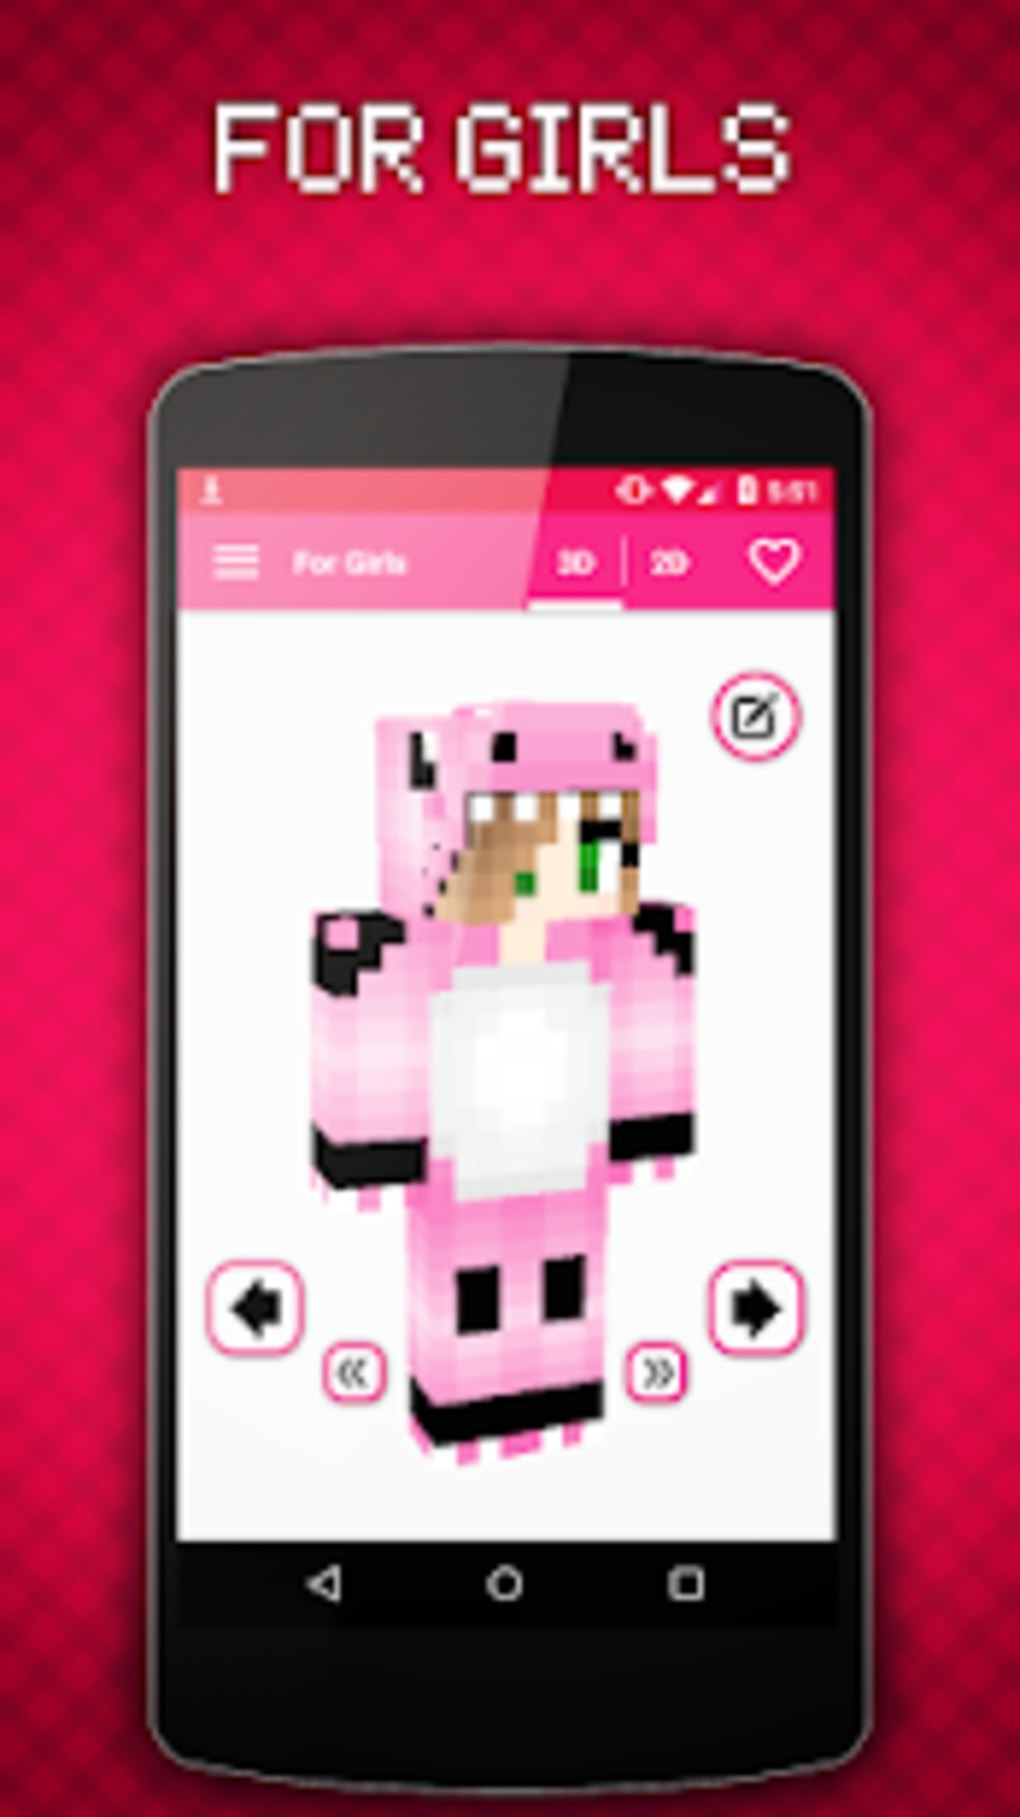 World of Skins APK for Android - Download